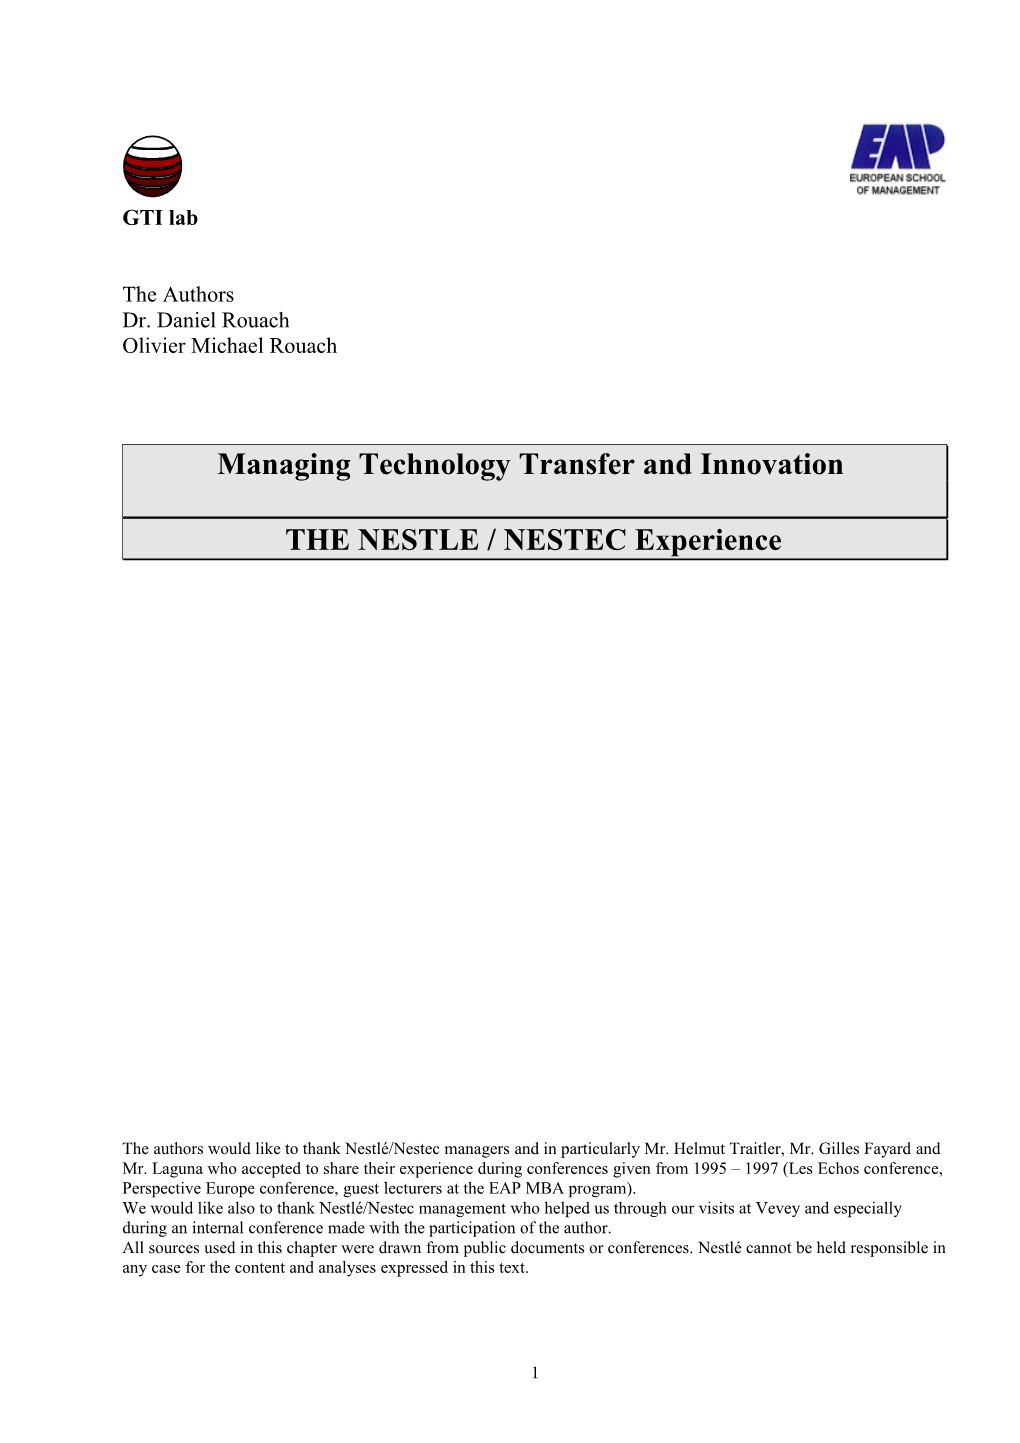 Managing Technology Transfer and Innovation